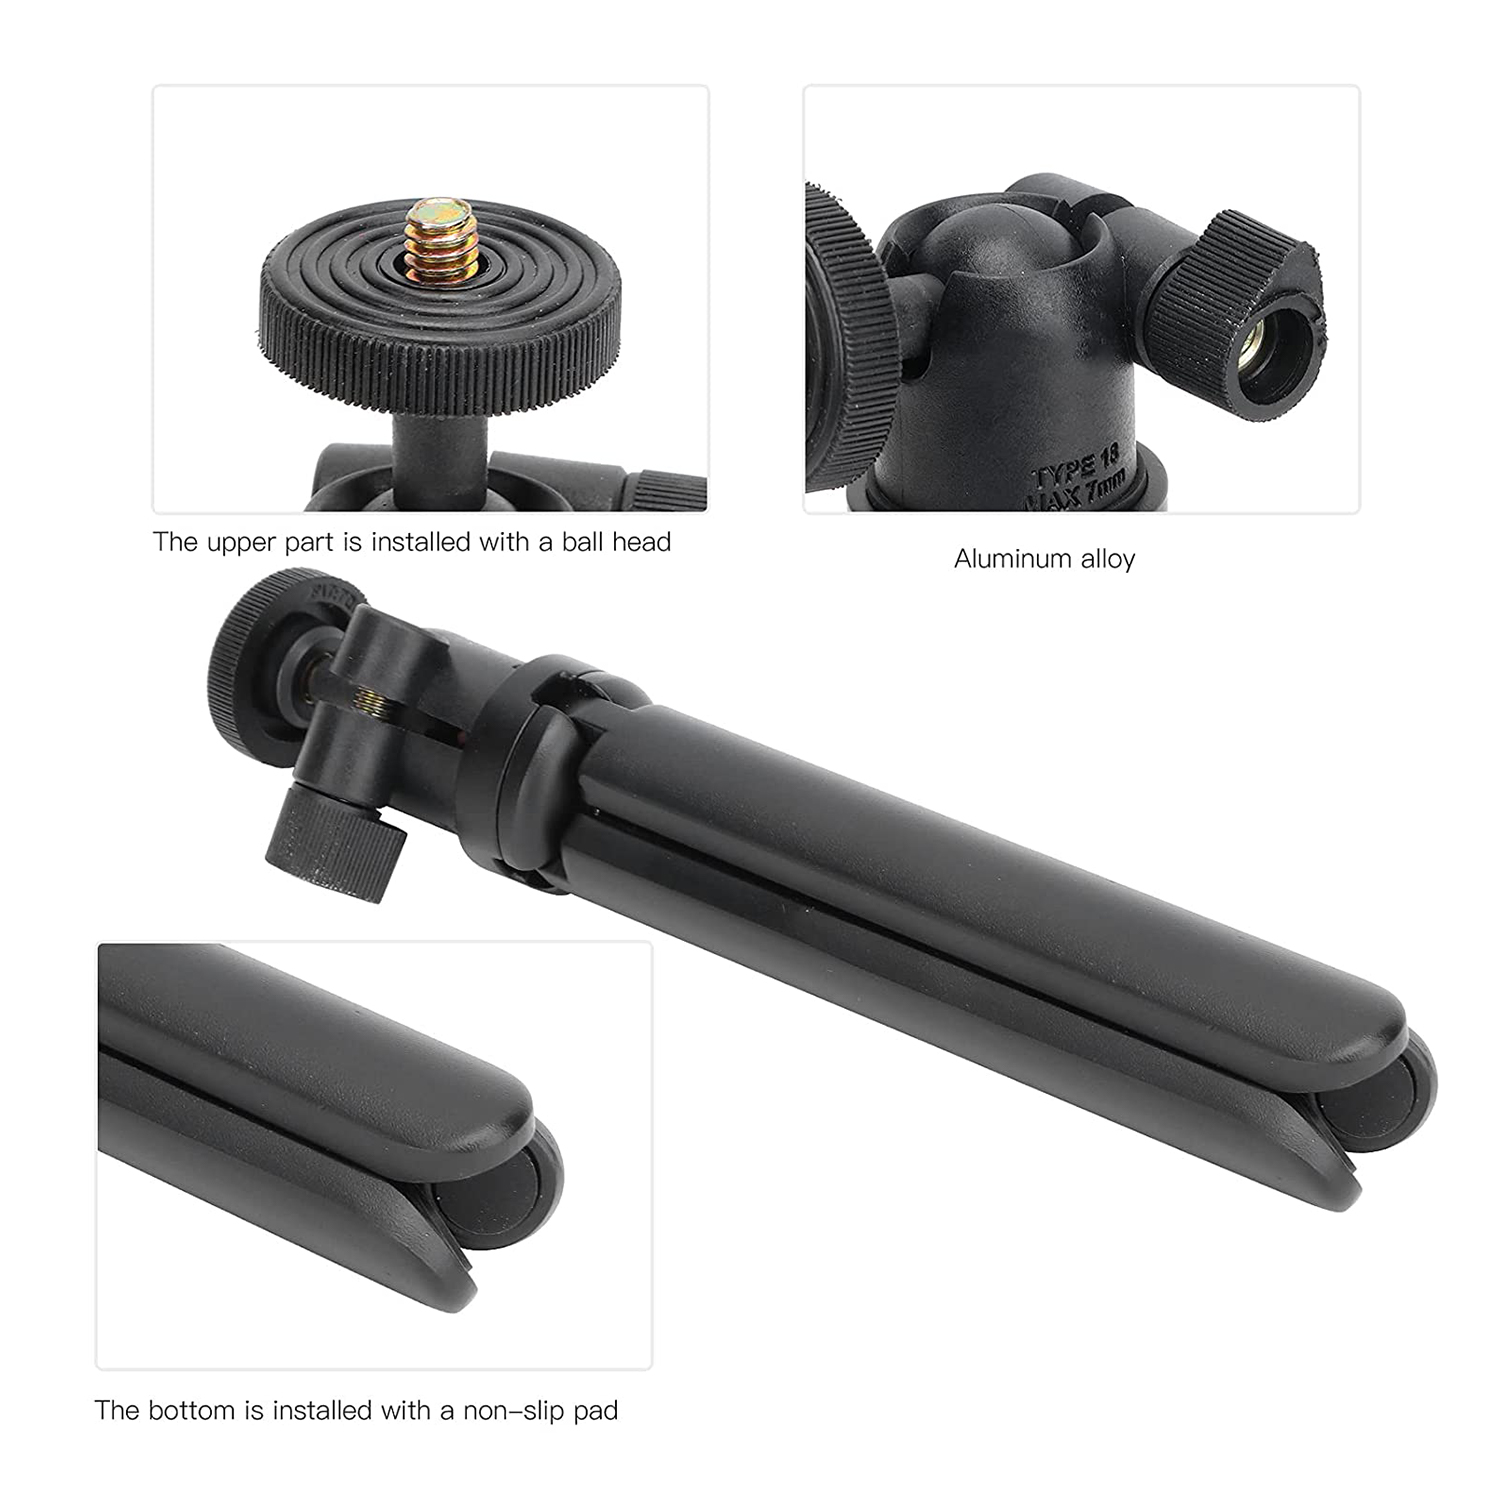 Phone Tripod, Black Mini Tripod Multifunction Collapsible 6cm-9cm Stretchable with Phone Clamp for Phones